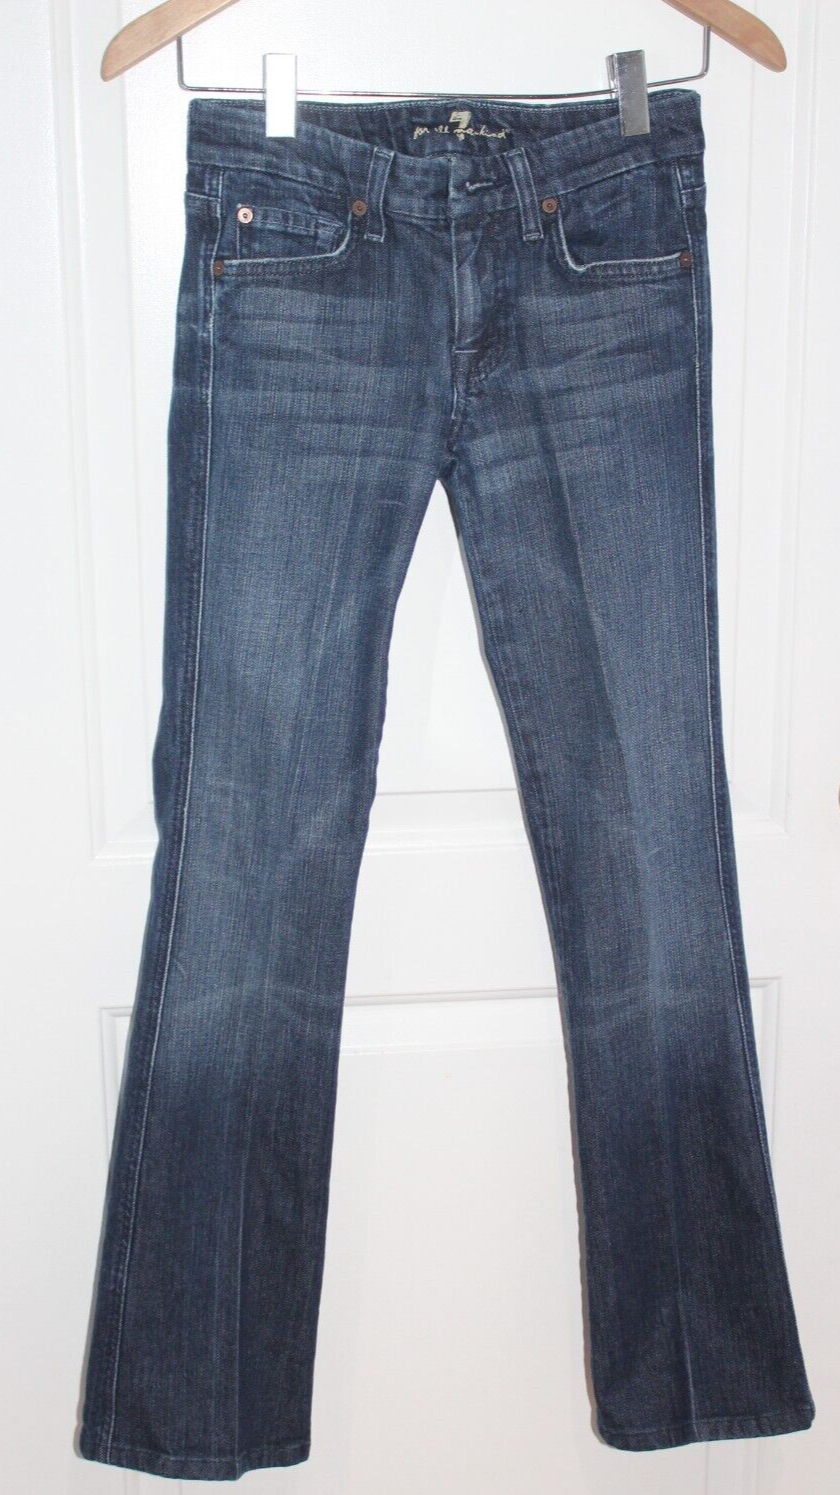 Primary image for 7 For All Mankind  Denim Blue Jeans Women's Size 24